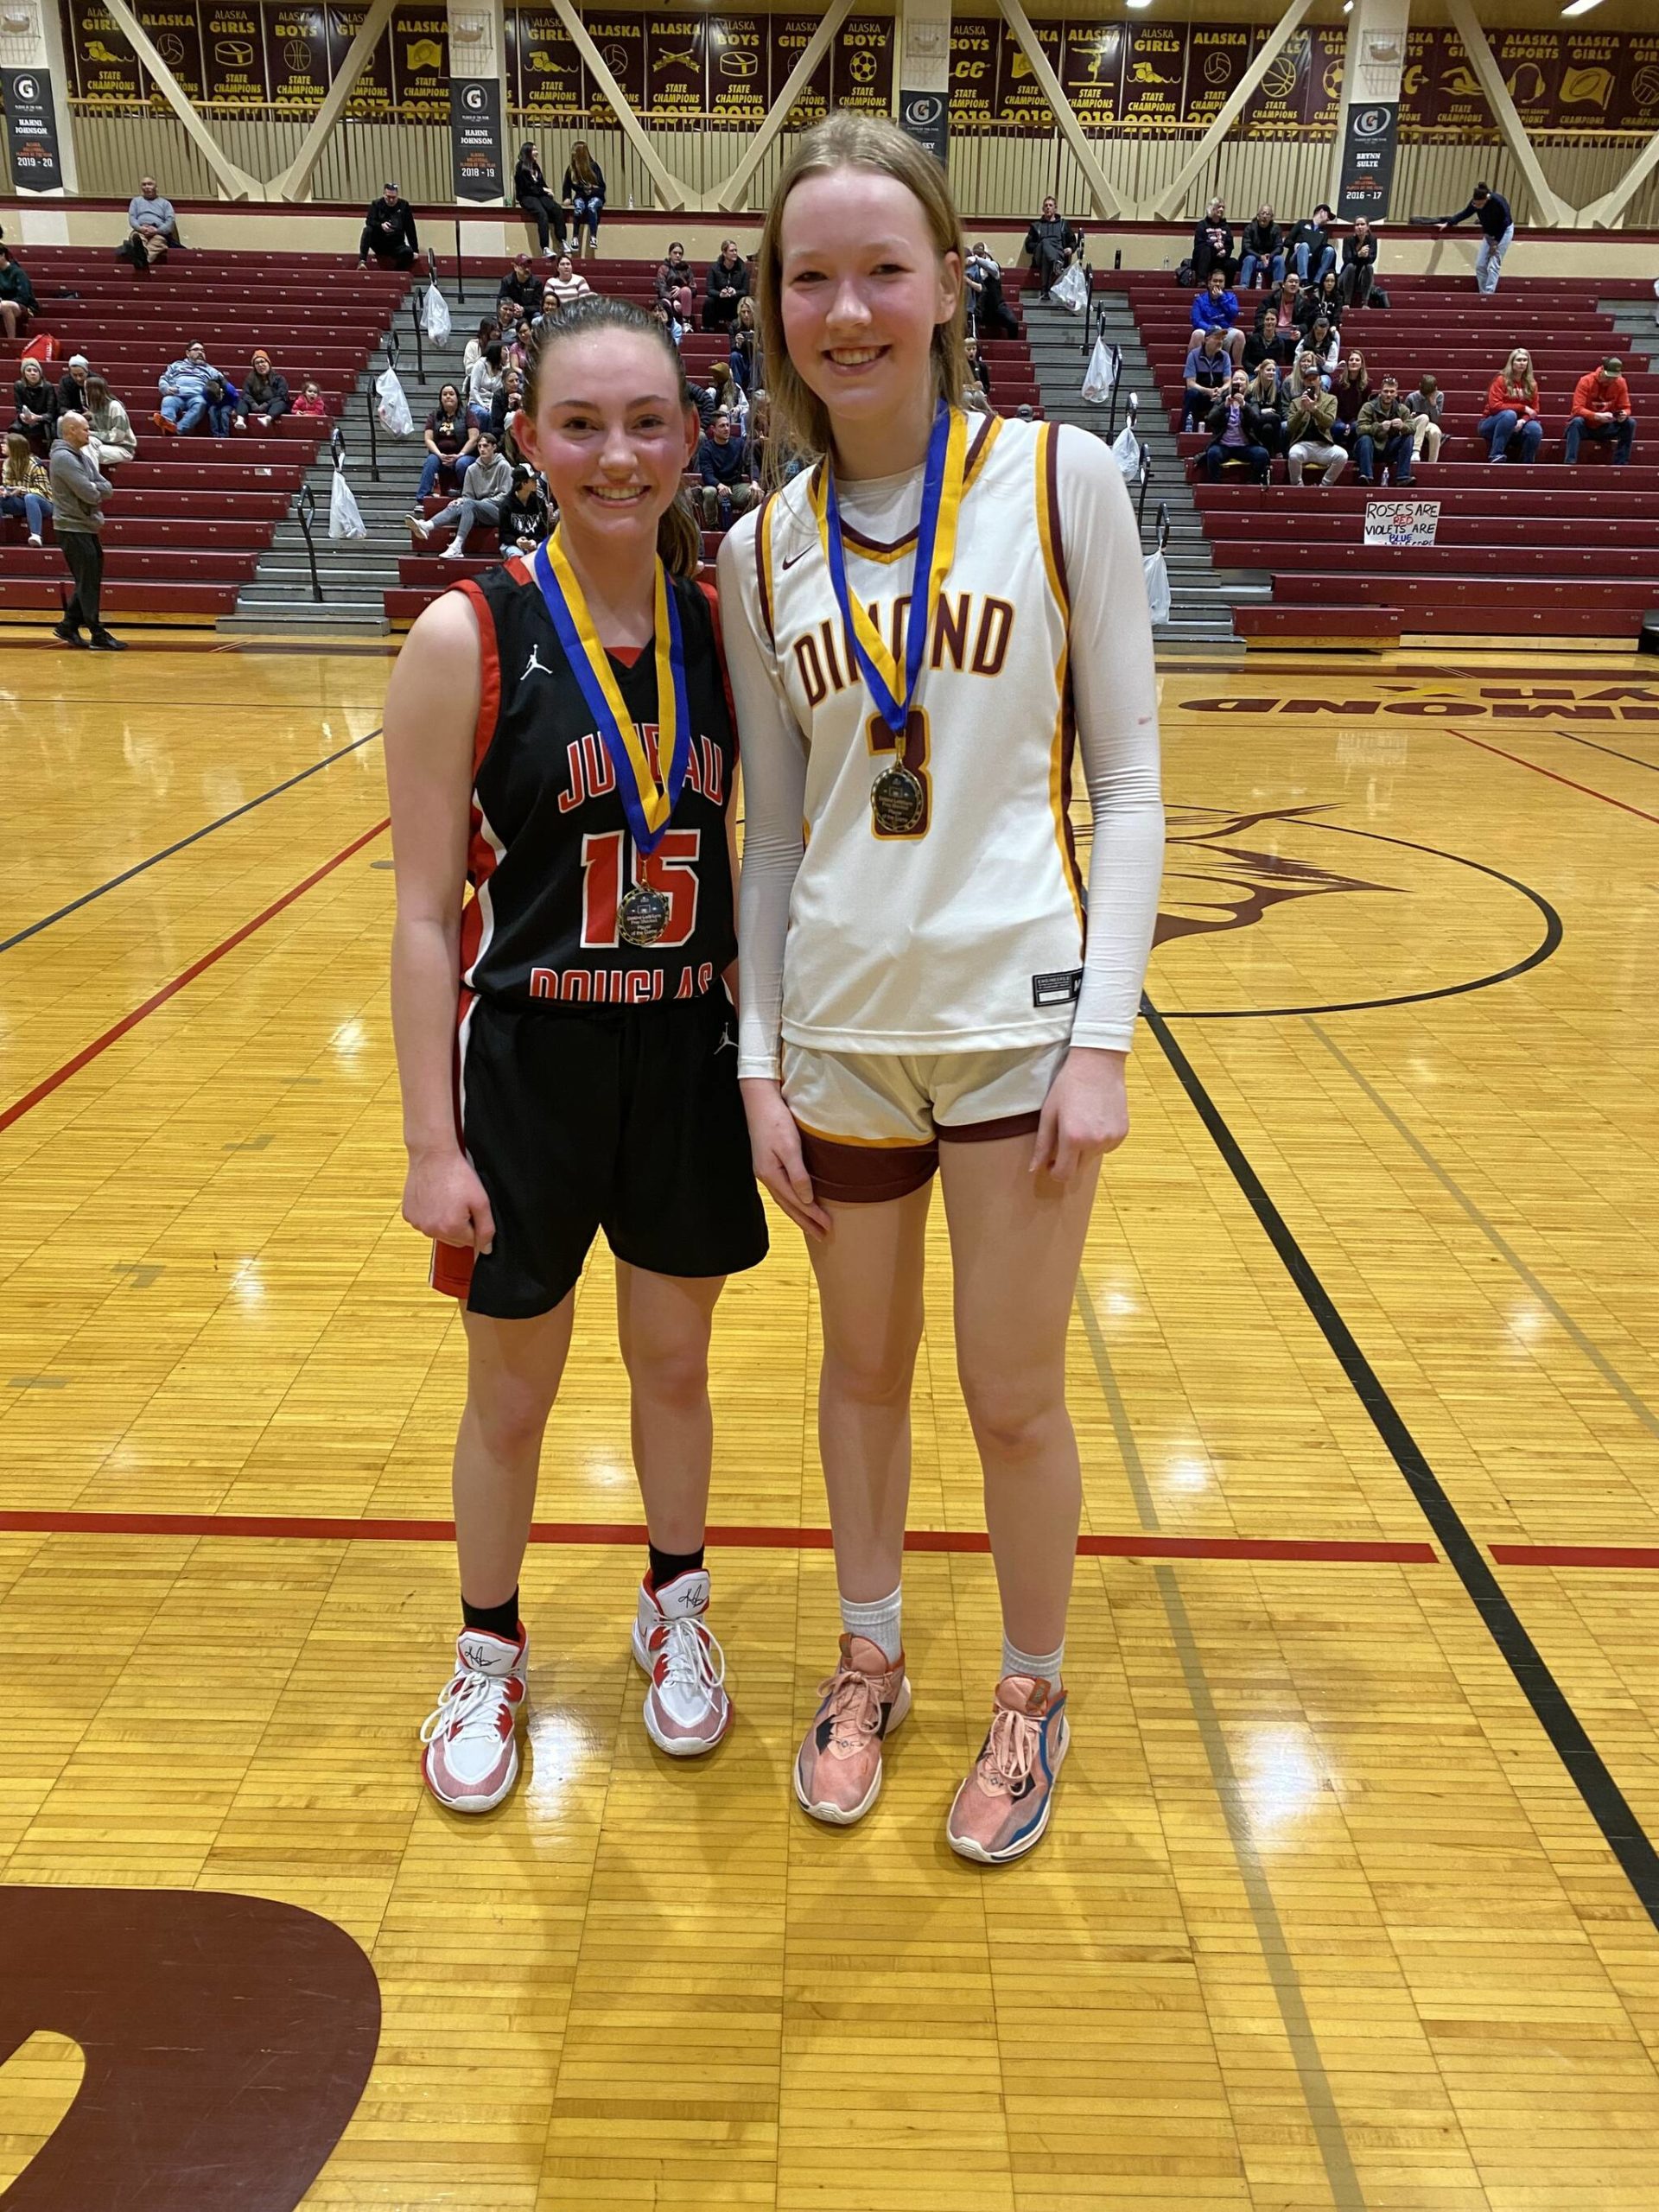 Courtesy Photo / Tanya Nizich 
JDHS freshman Gwen Nizich, left, poses after earning Player of the Game on Saturday against Dimond High School.